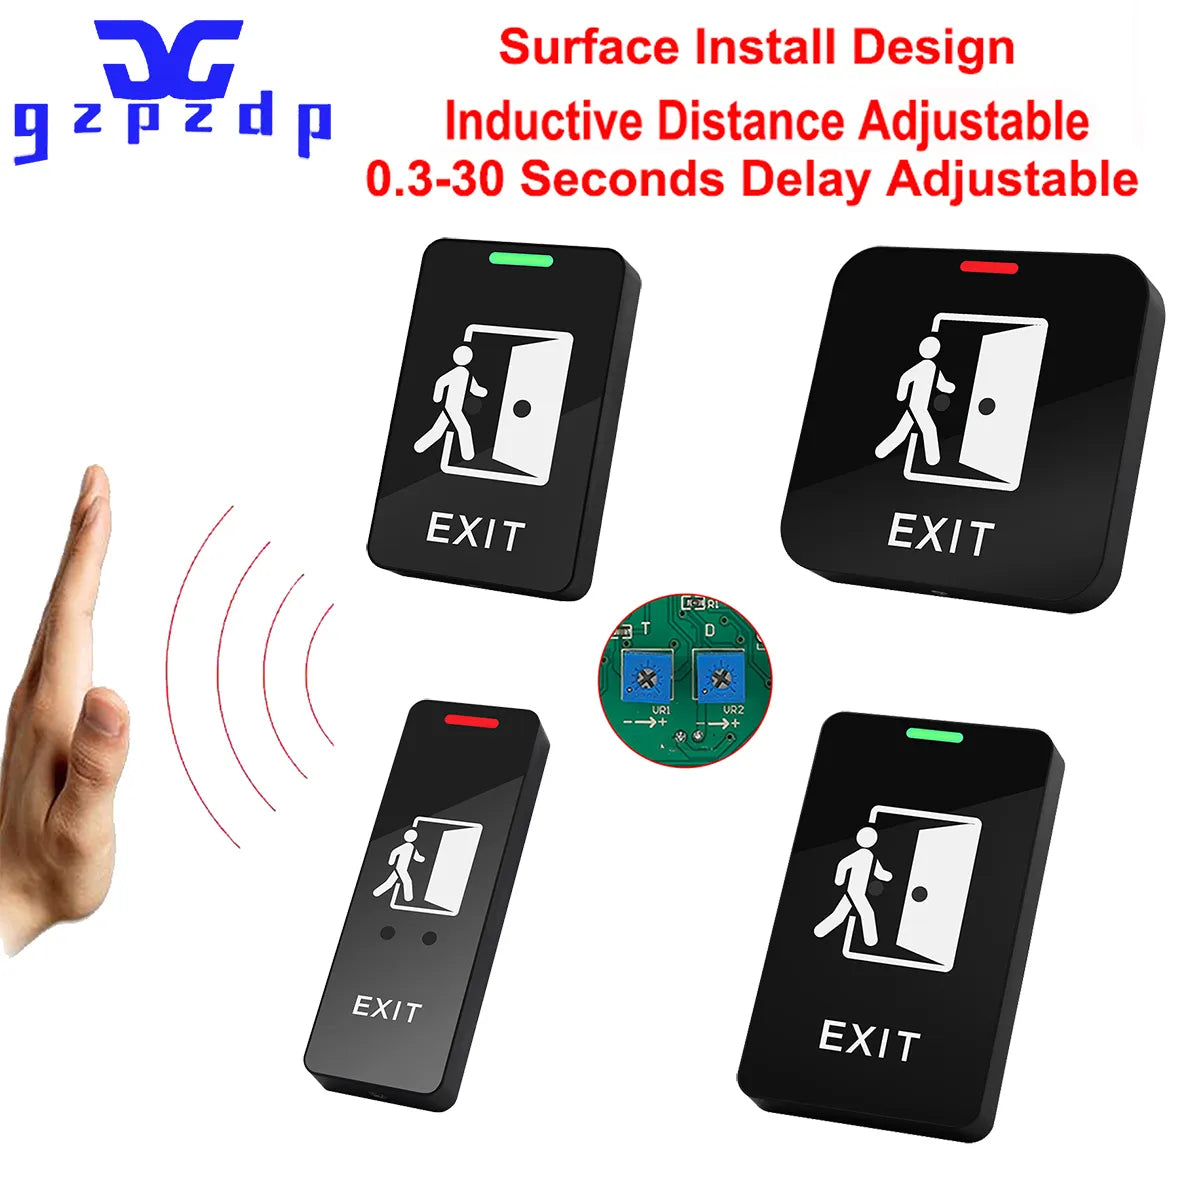 DC12V 24V Surface Install Infrared Sensor Door Lock Release Switch Access Control System Accessory No Touch Exit Button